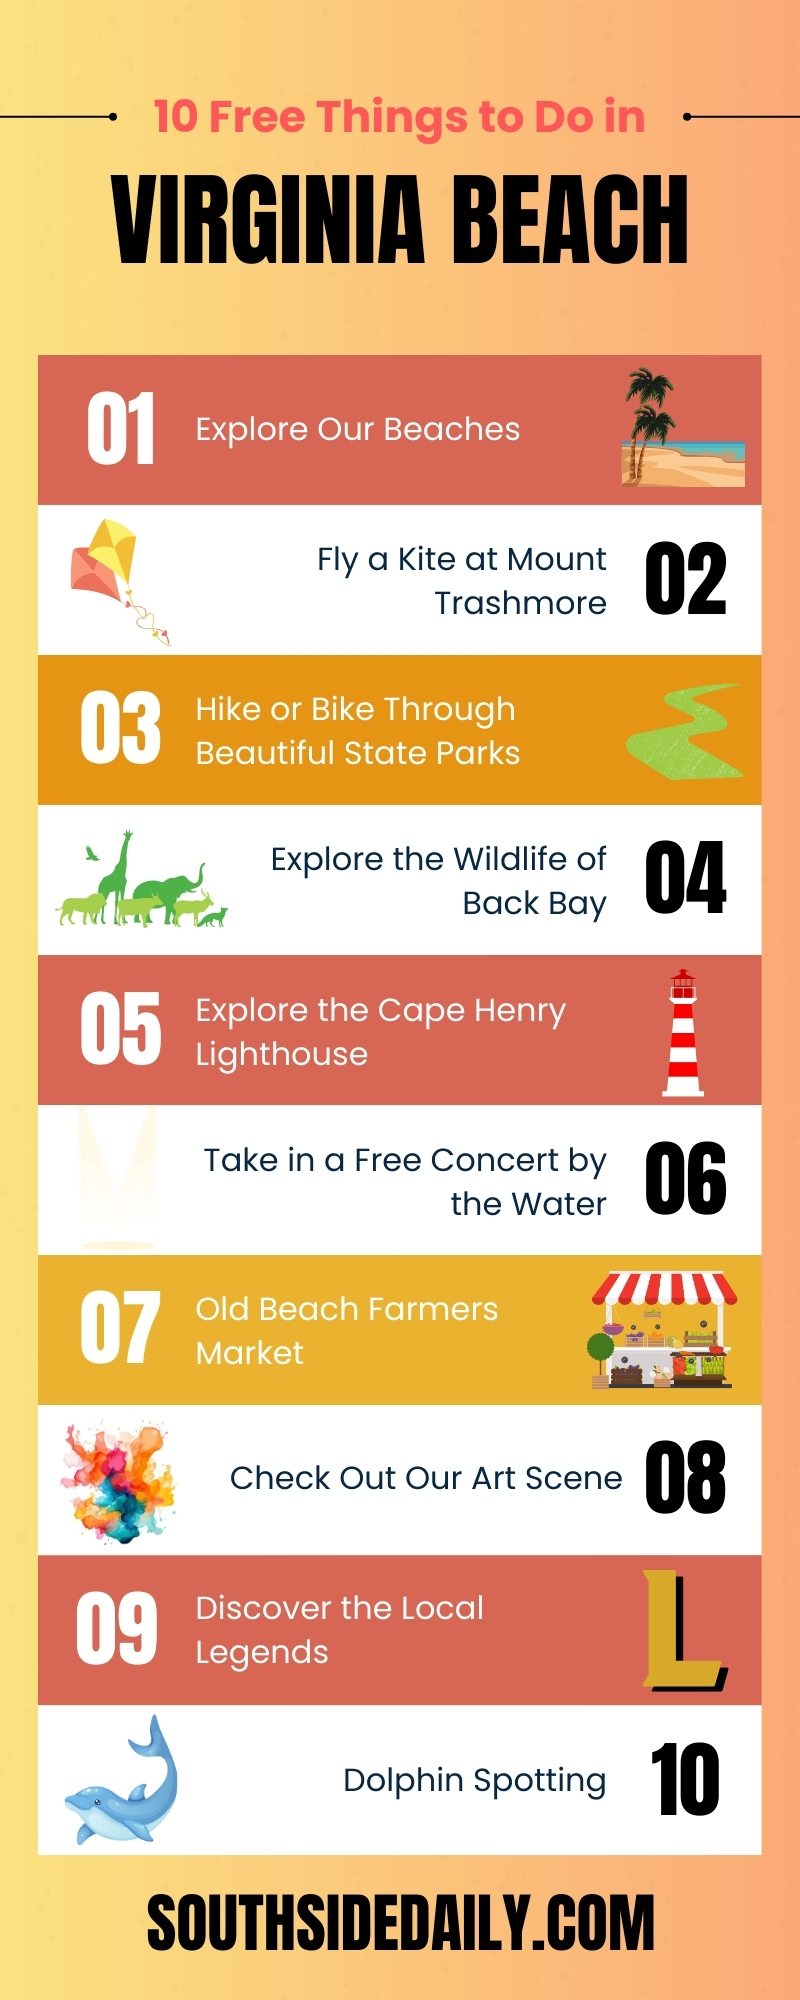 10 Free Things to Do in Virginia Beach Infographic